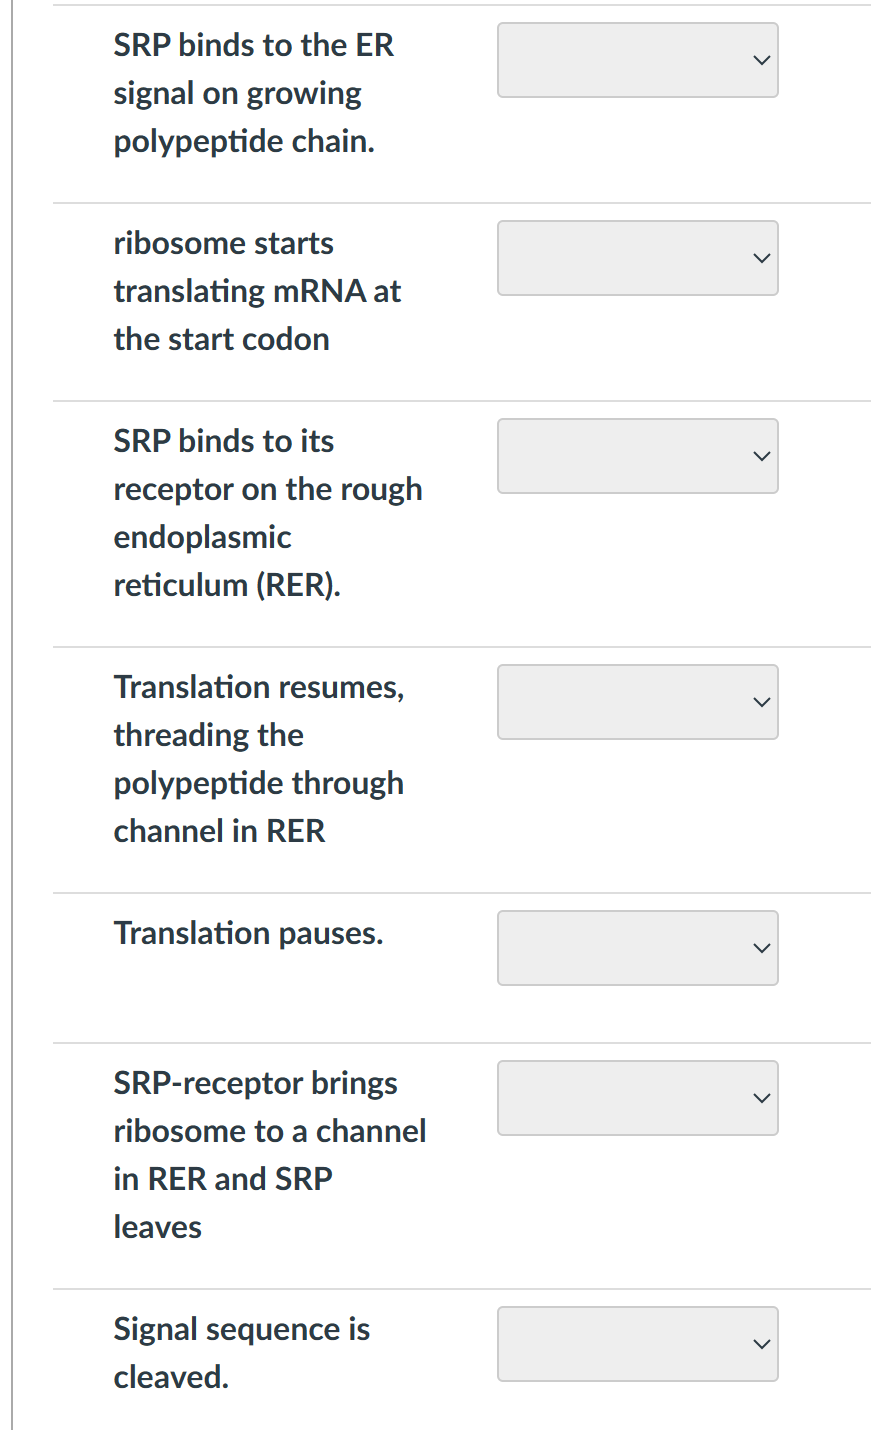 SRP binds to the ER
signal on growing
polypeptide chain.
ribosome starts
translating mRNA at
the start codon
SRP binds to its
receptor on the rough
endoplasmic
reticulum (RER).
Translation resumes,
threading the
polypeptide through
channel in RER
Translation pauses.
SRP-receptor brings
ribosome to a channel
in RER and SRP
leaves
Signal sequence is
cleaved.
I